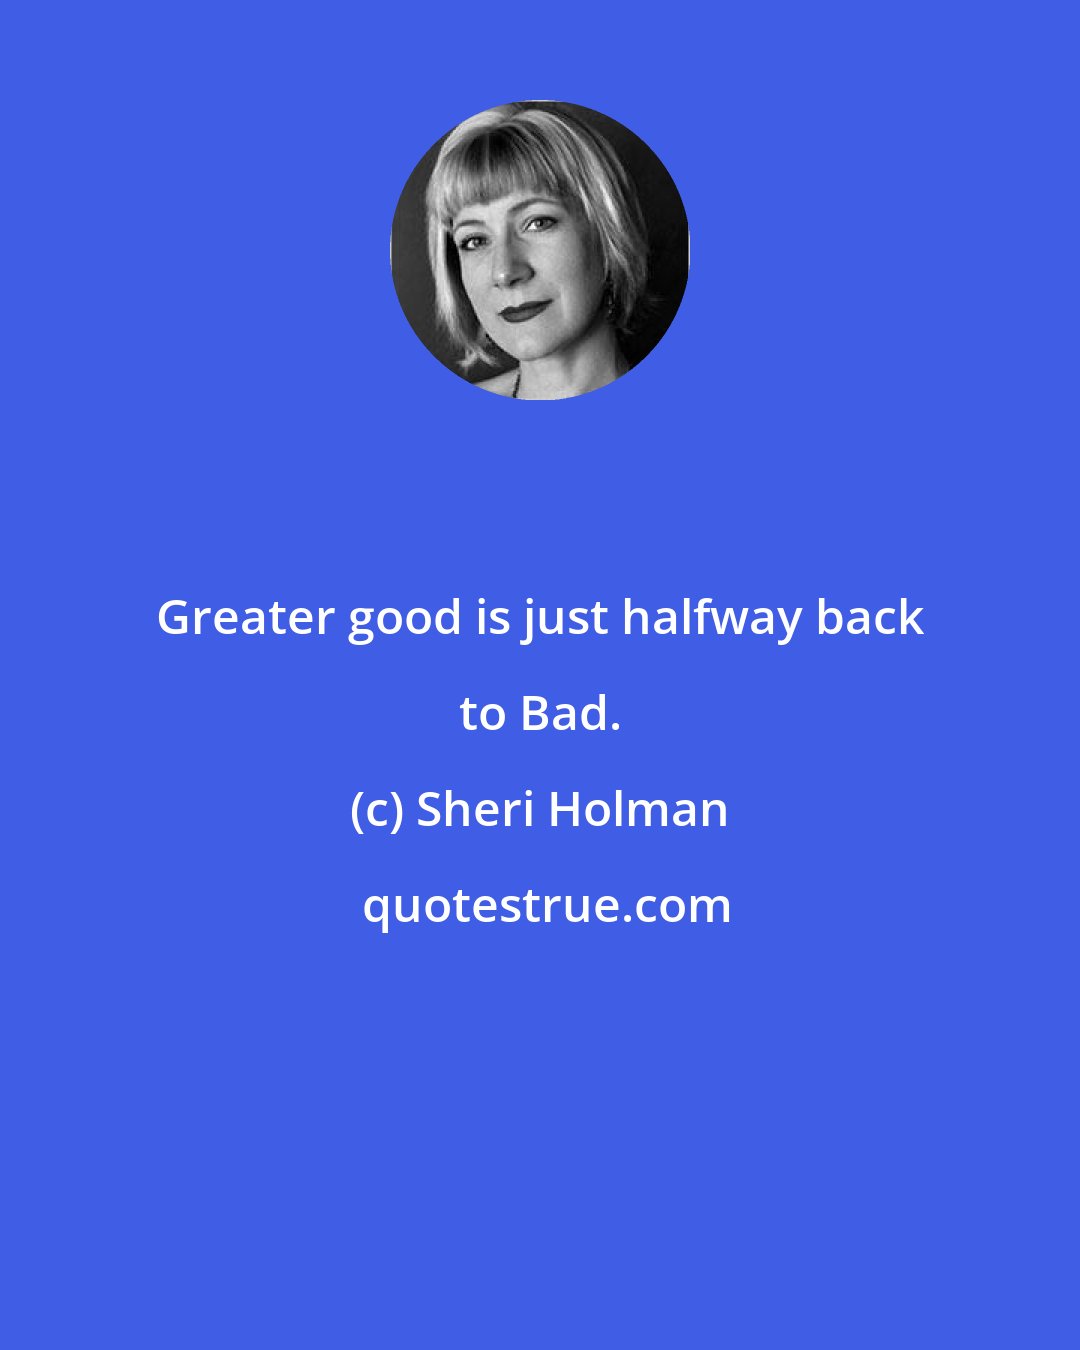 Sheri Holman: Greater good is just halfway back to Bad.